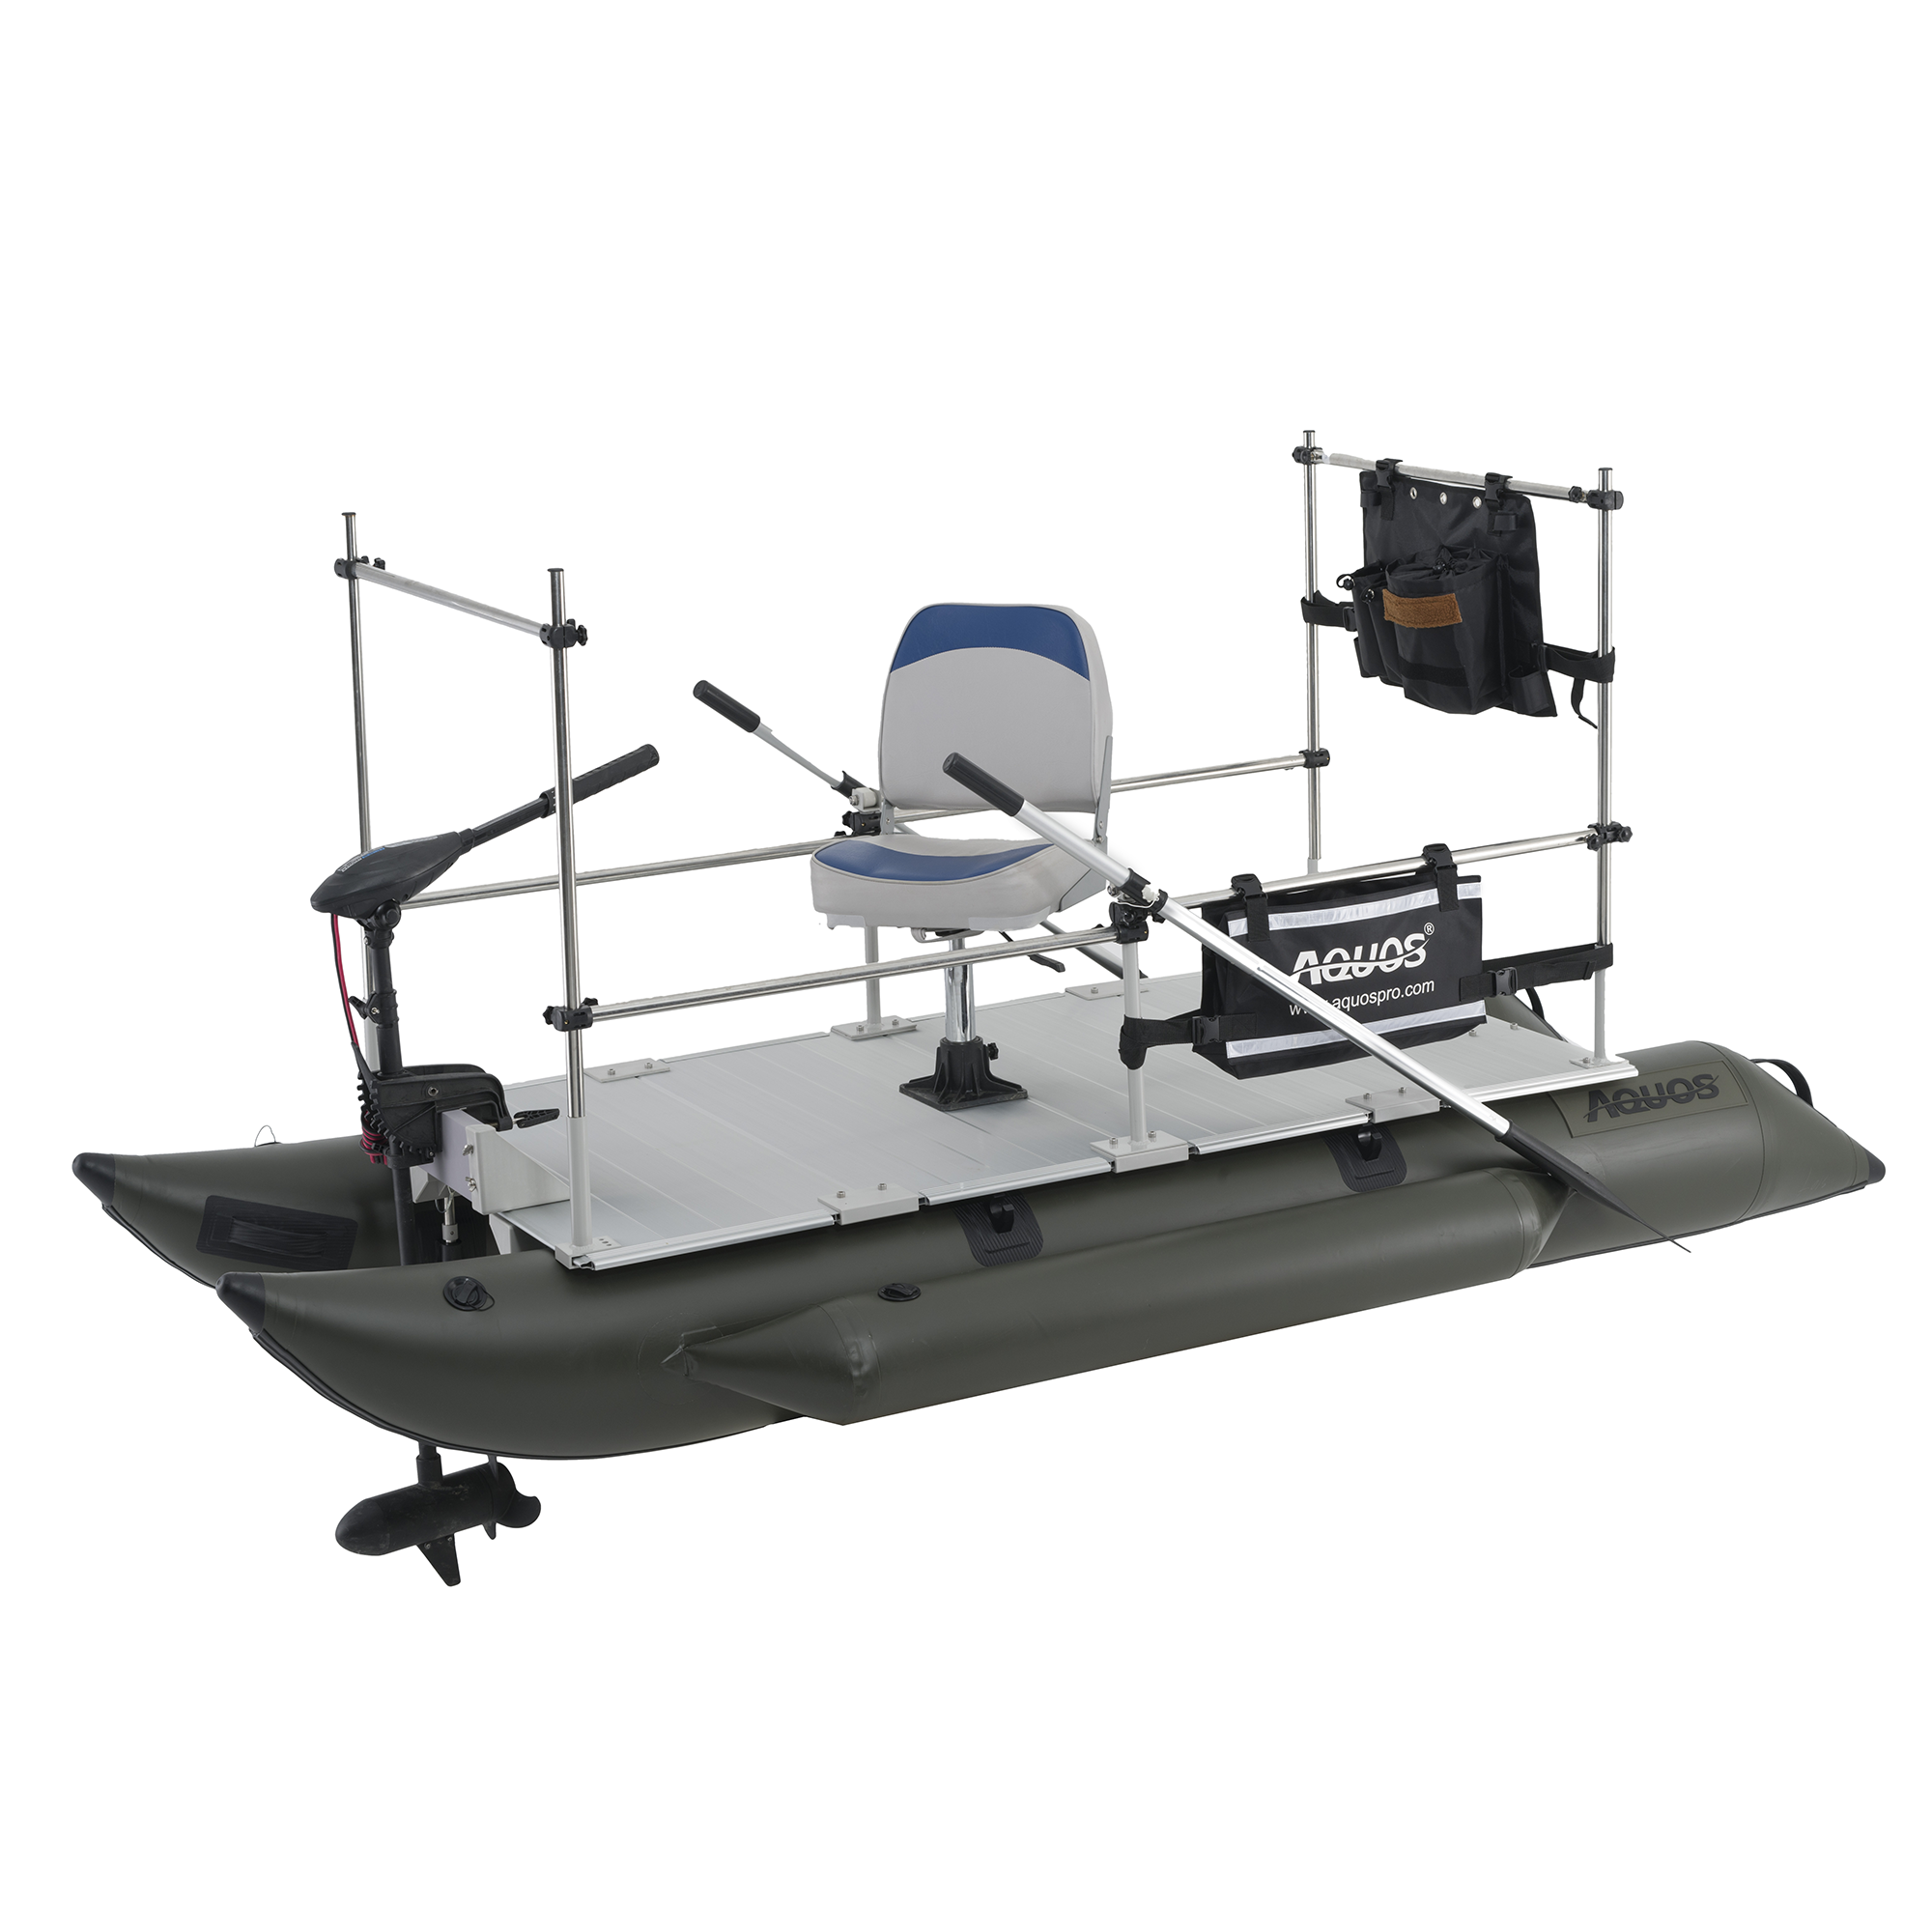 AQUOS New Heavy-Duty for One Series 10.2plus ft Inflatable Pontoon Boat with Haswing Bow Mount 12V 55lbs Hand Control Trolling Motor